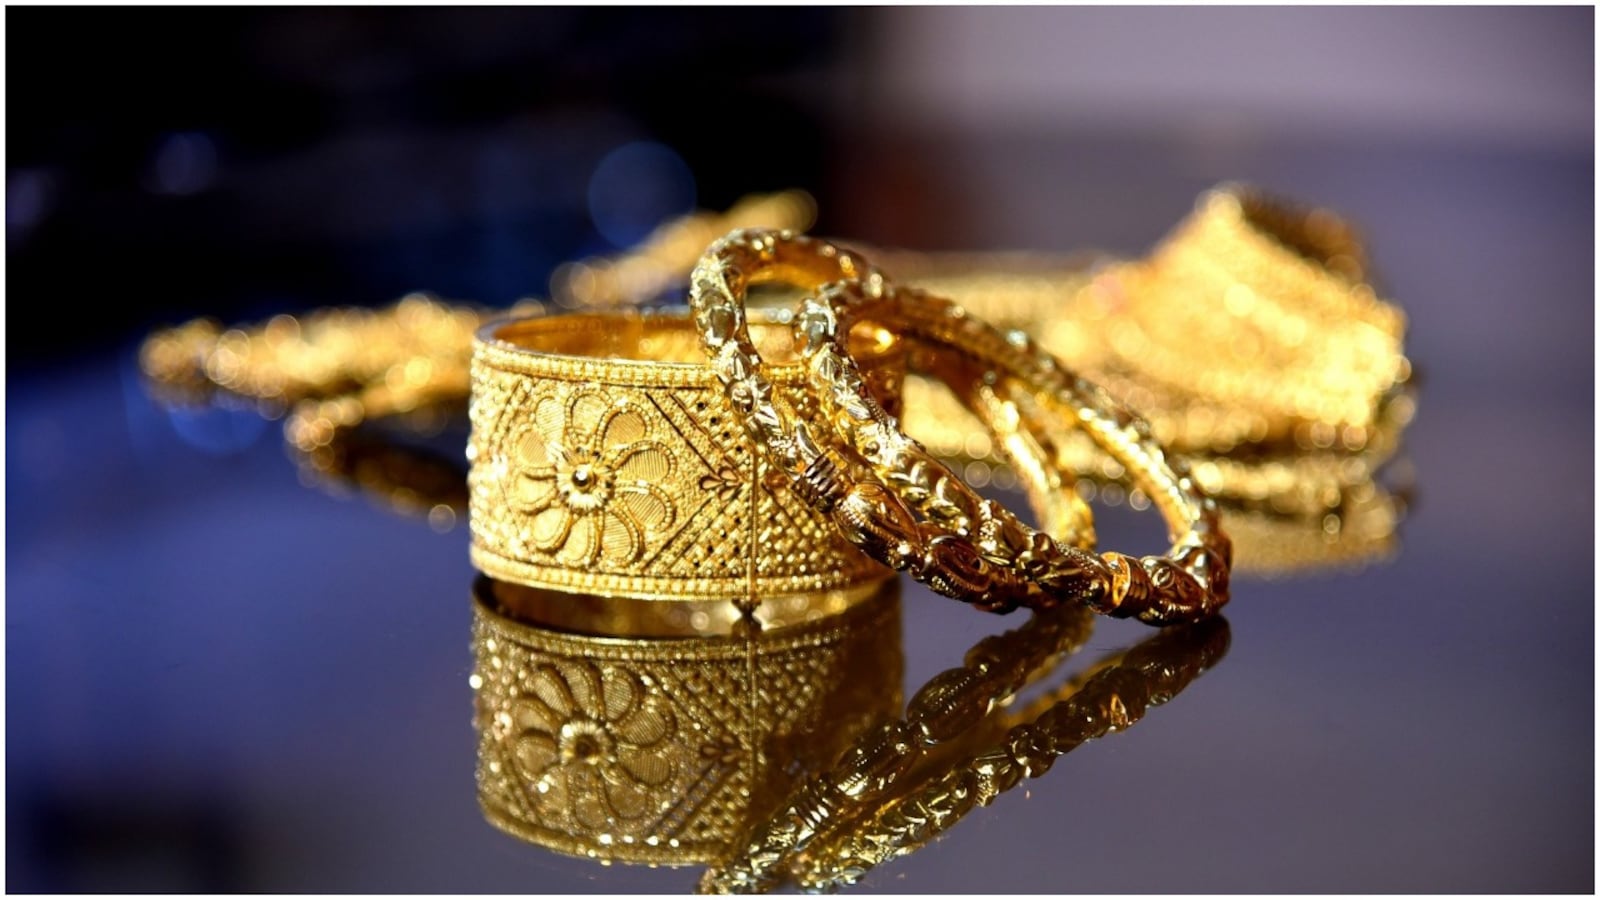 Buying gold from Dubai to avoid import duty? Think again